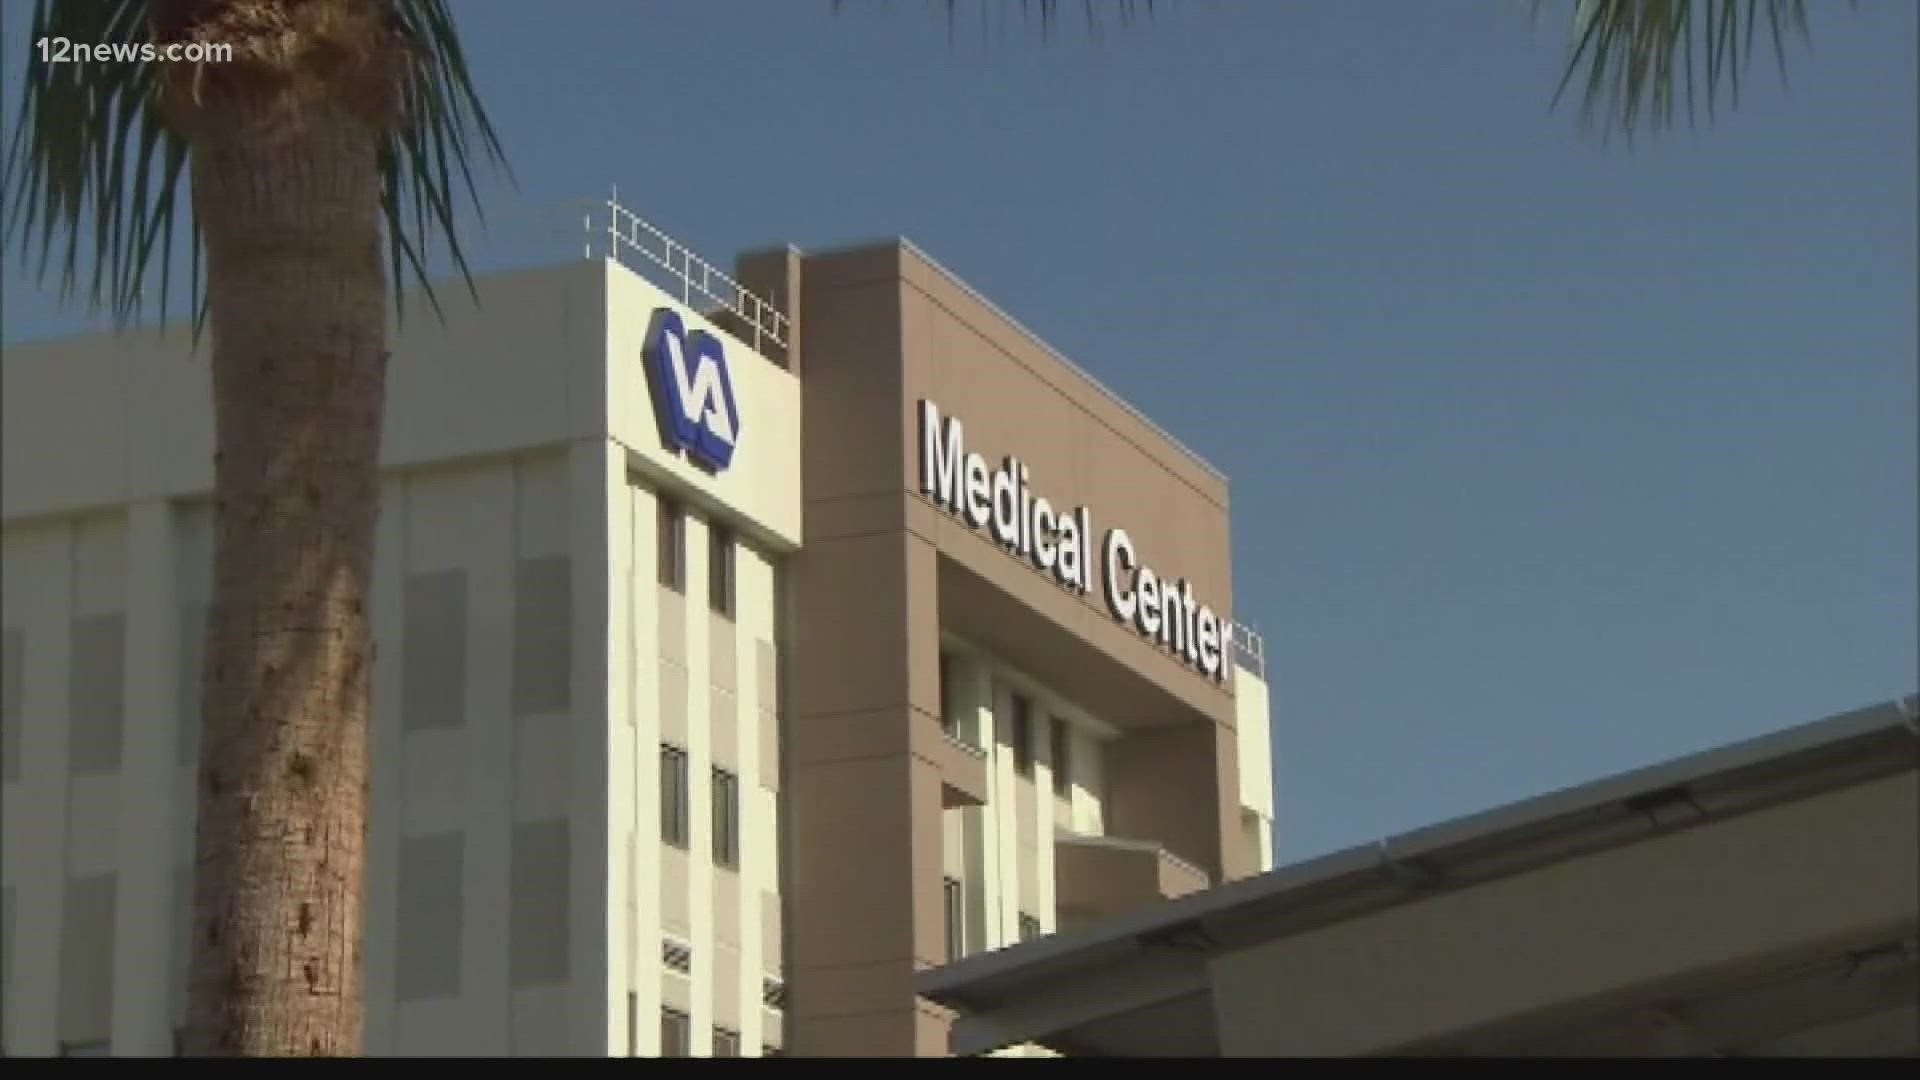 Water problems forced the Phoenix VA Medical Center to send patients elsewhere while steps were taken to improve the water quality in the building.